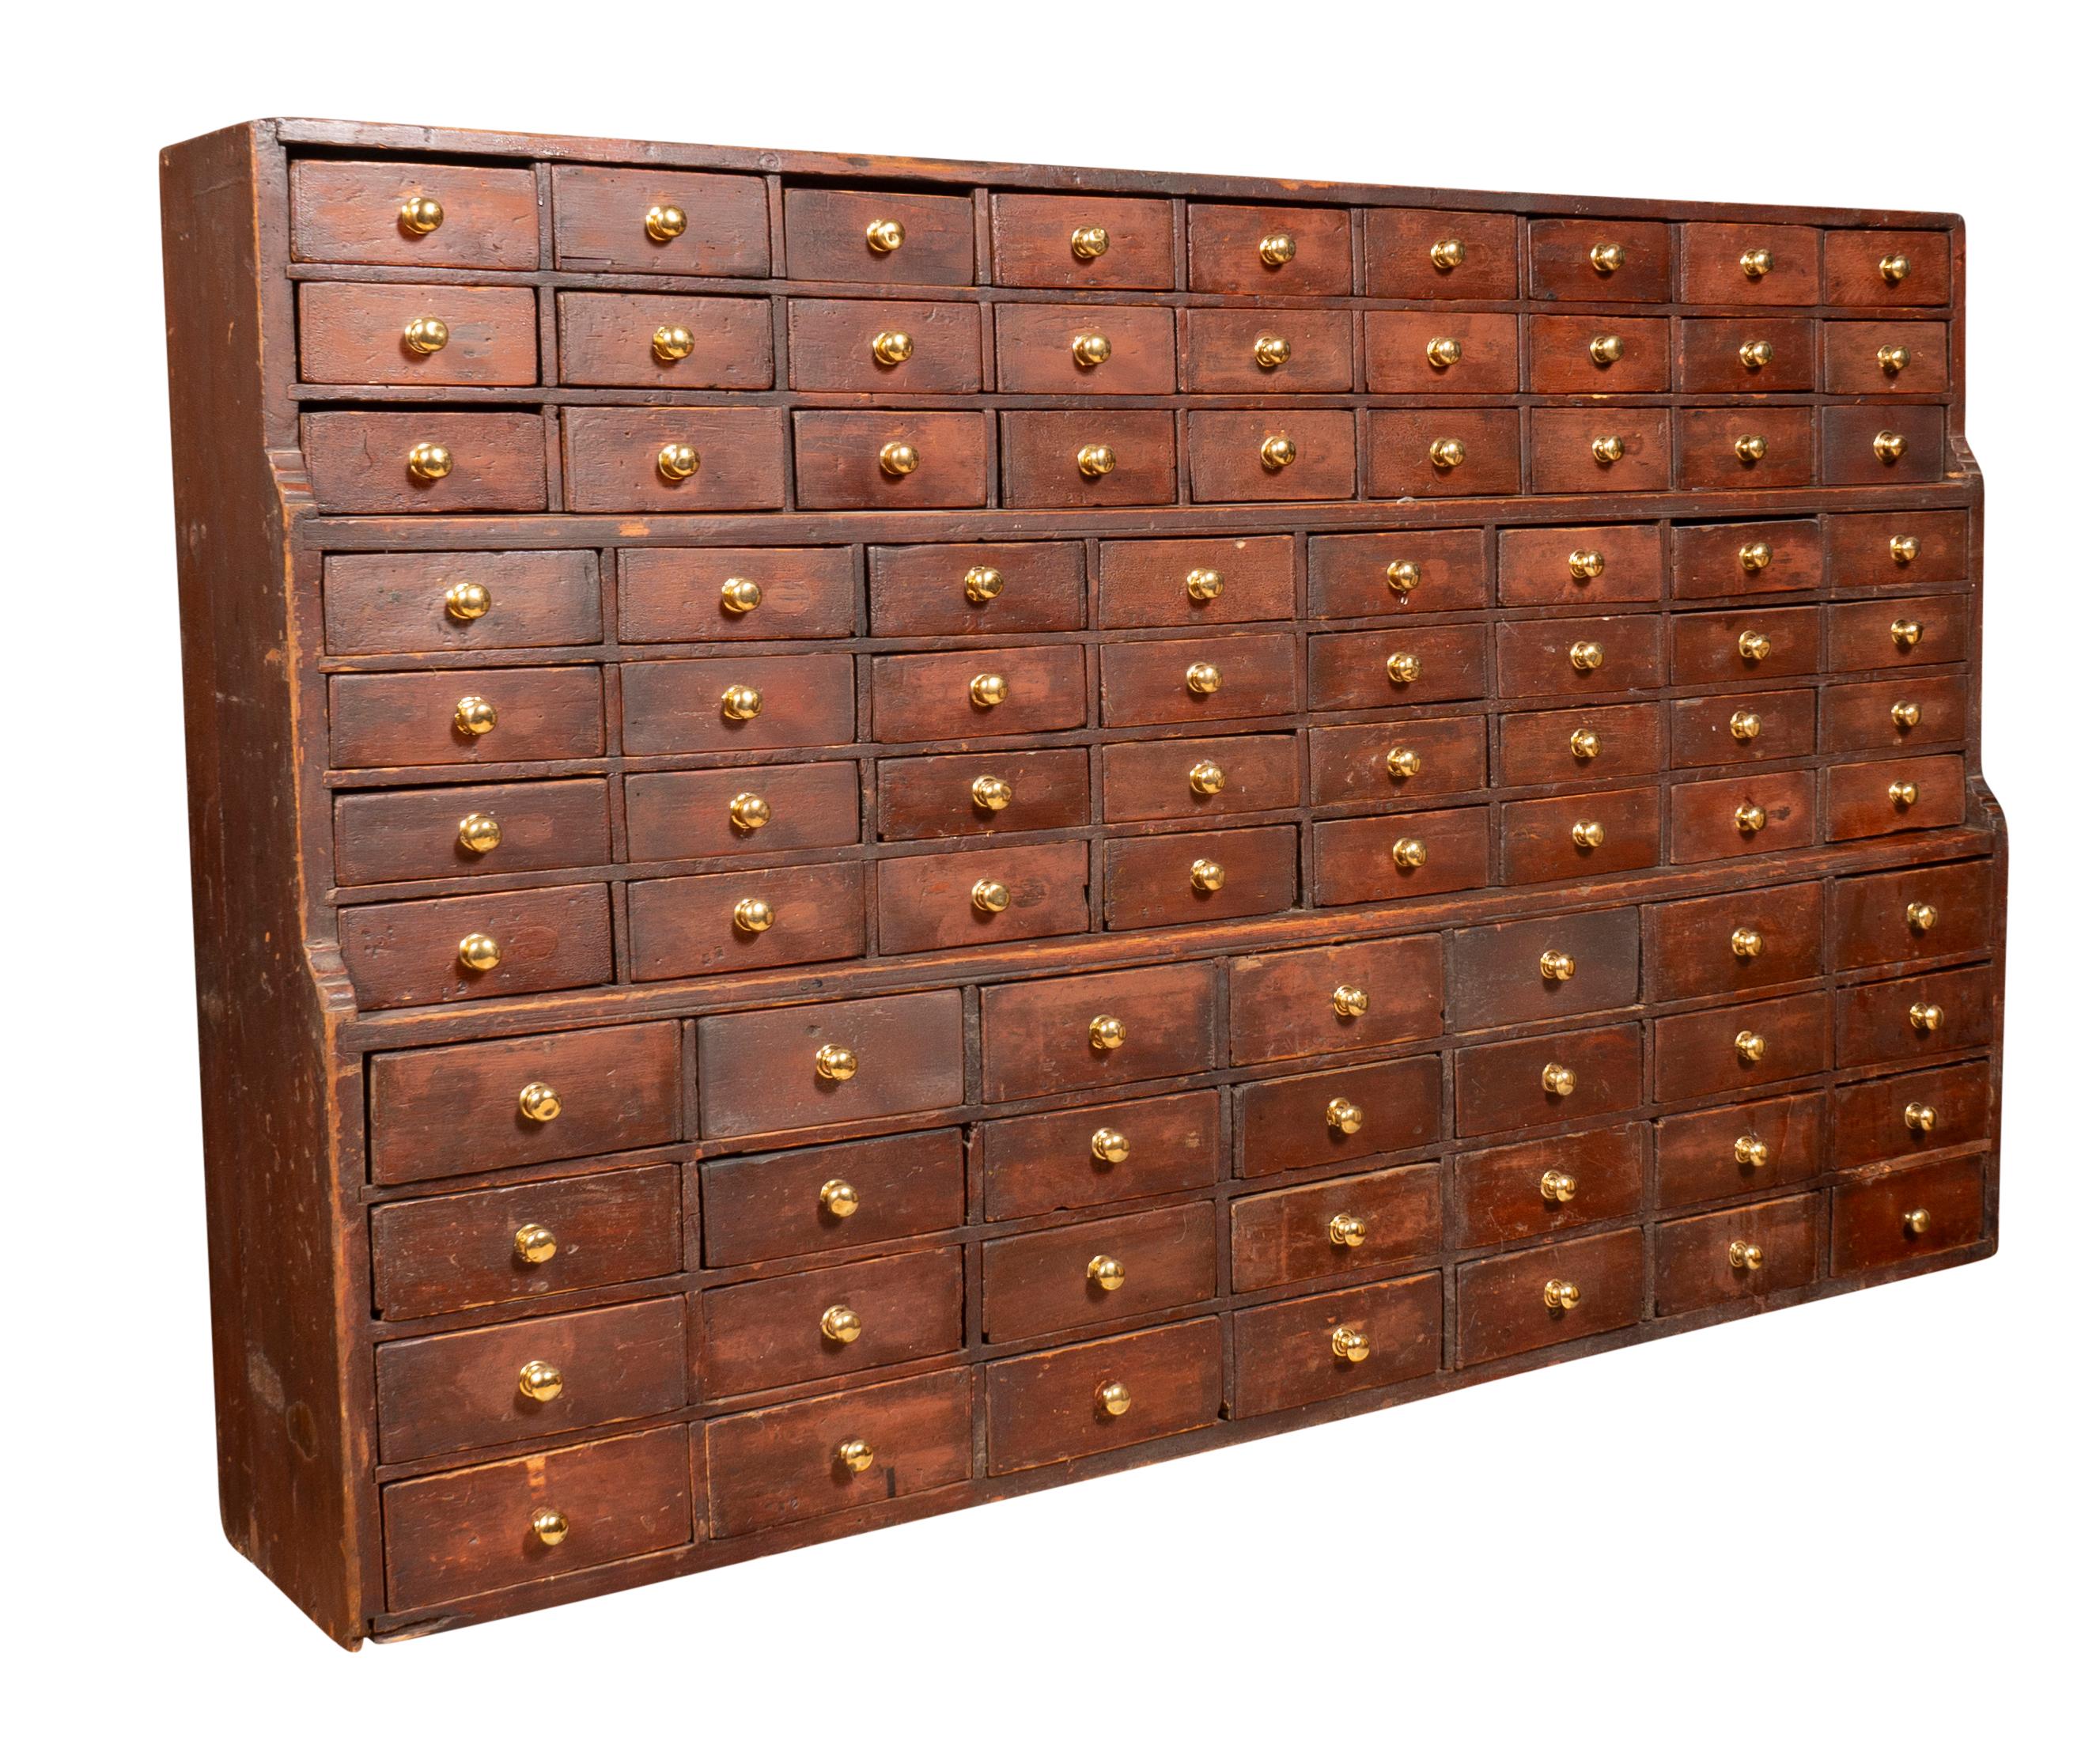 Having 87 drawers with brass knobs. Once used in a general store or apothecary. Shallow proportions.